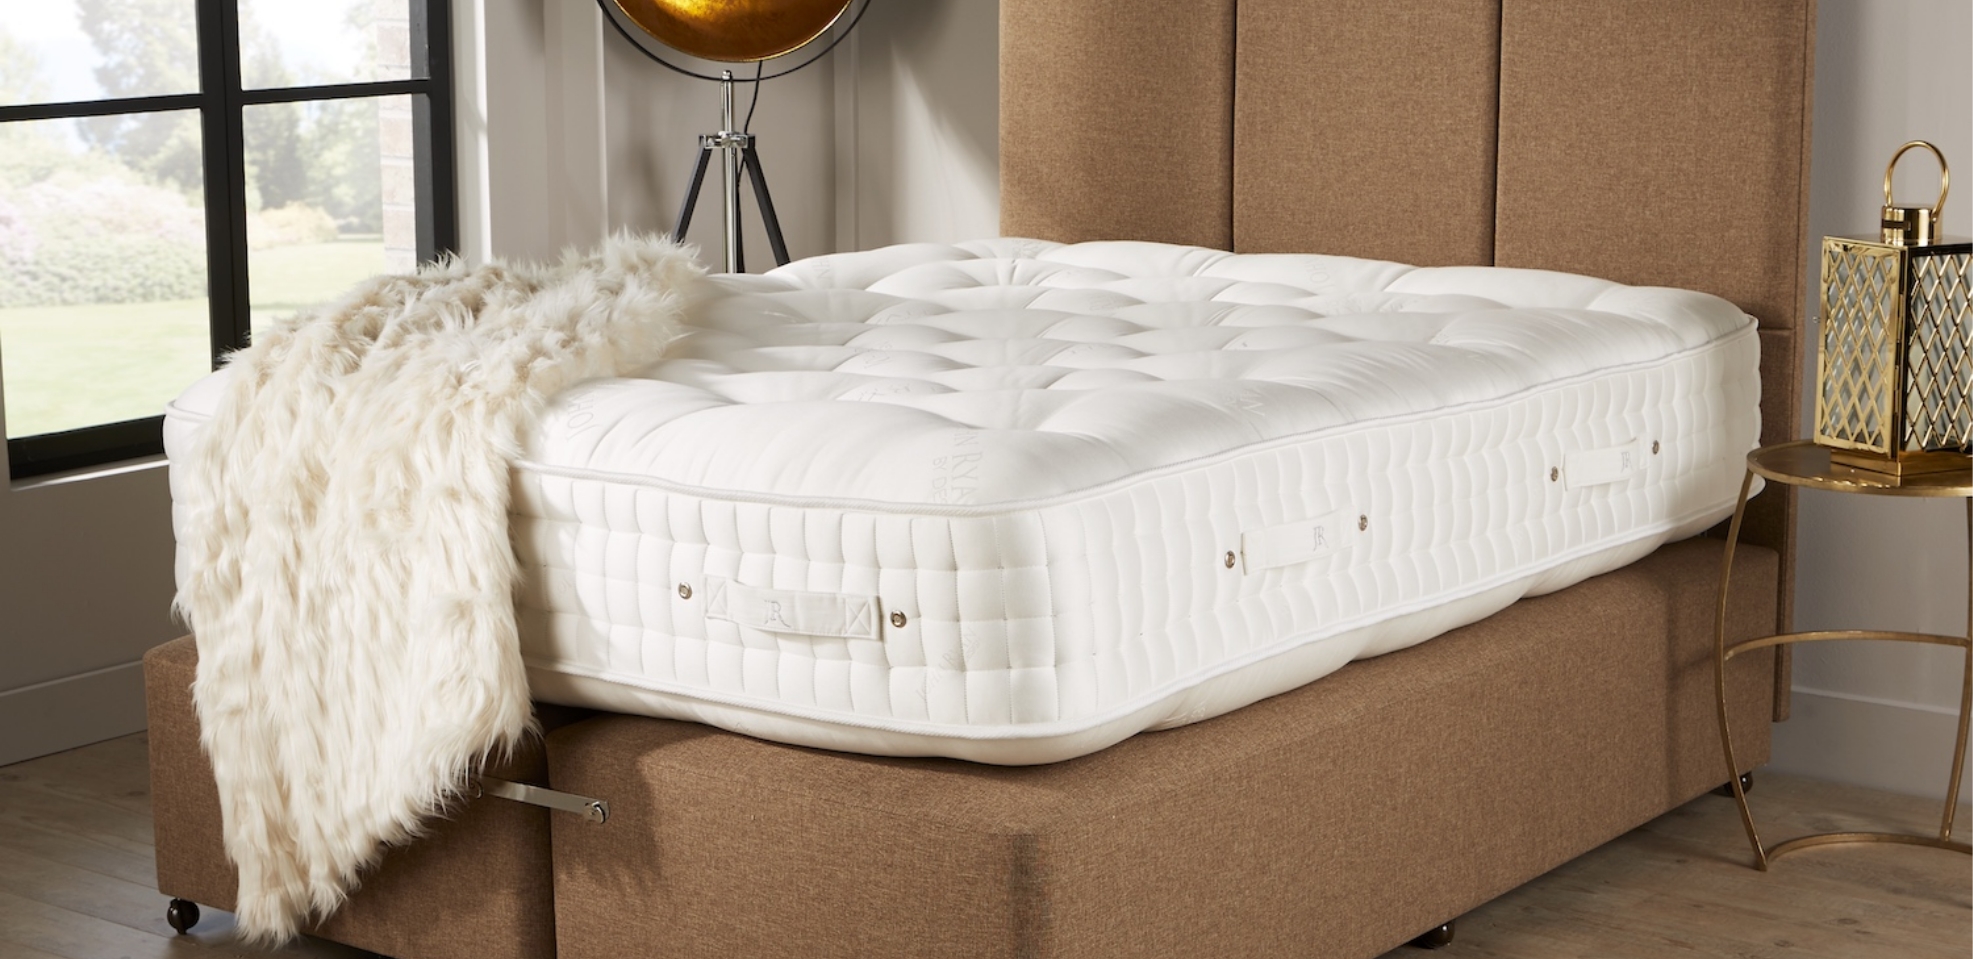 How To Fix Body Impressions In Mattress